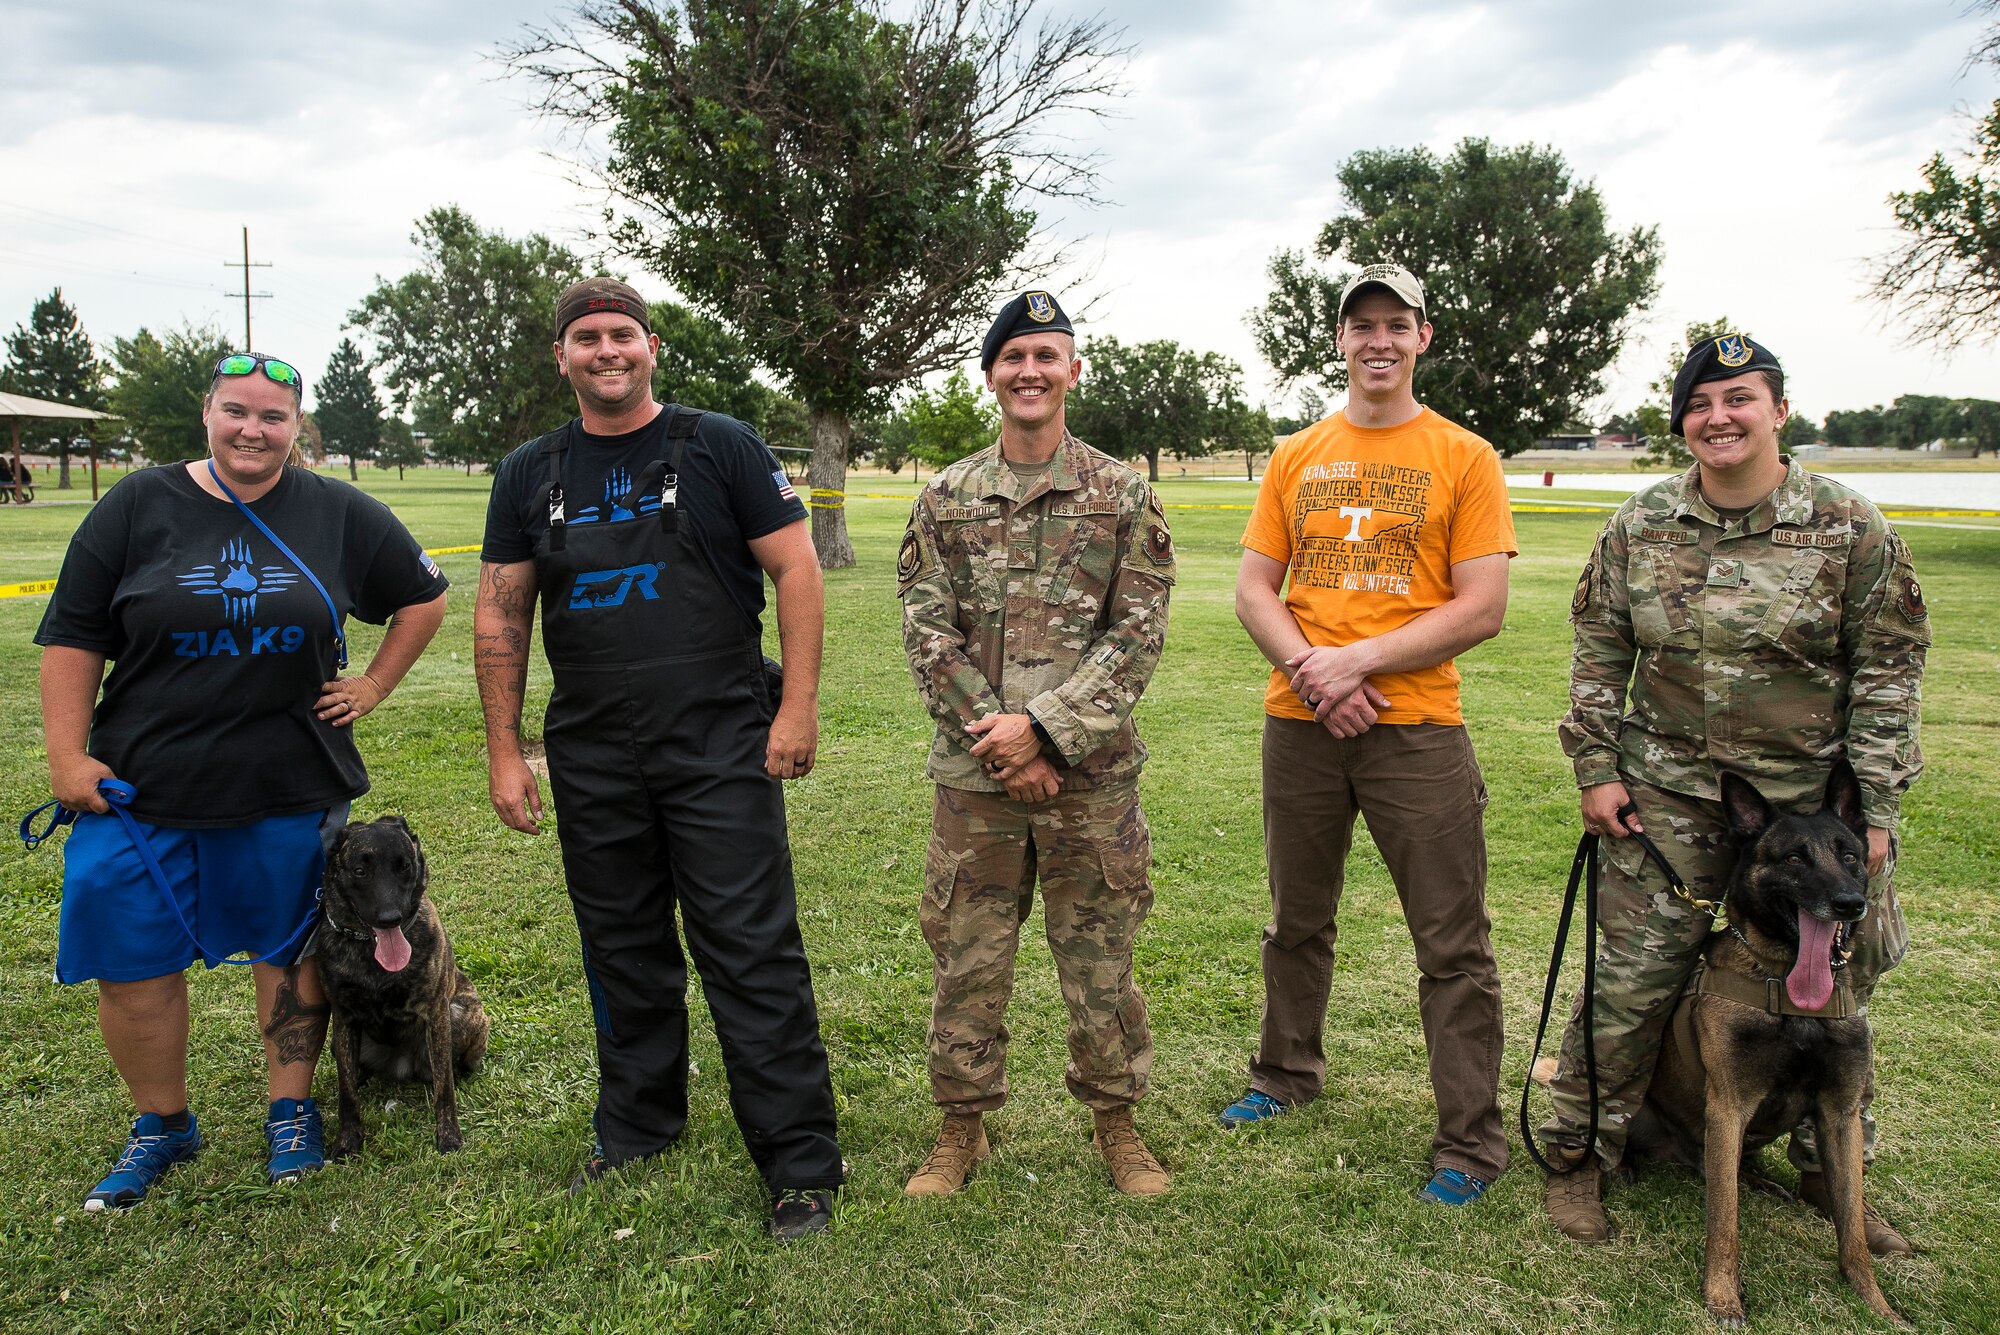 Members of the 27th Special Operations Security Forces Squadron and Zia K-9 pose for a photo after performing a MWD and K-9 demonstration at the National Night Out in Clovis, N.M., August 6, 2019. The display showed the effectiveness of military working dogs and the discipline they have. (U.S. Air Force photo by Senior Airman Vernon R. Walter III)